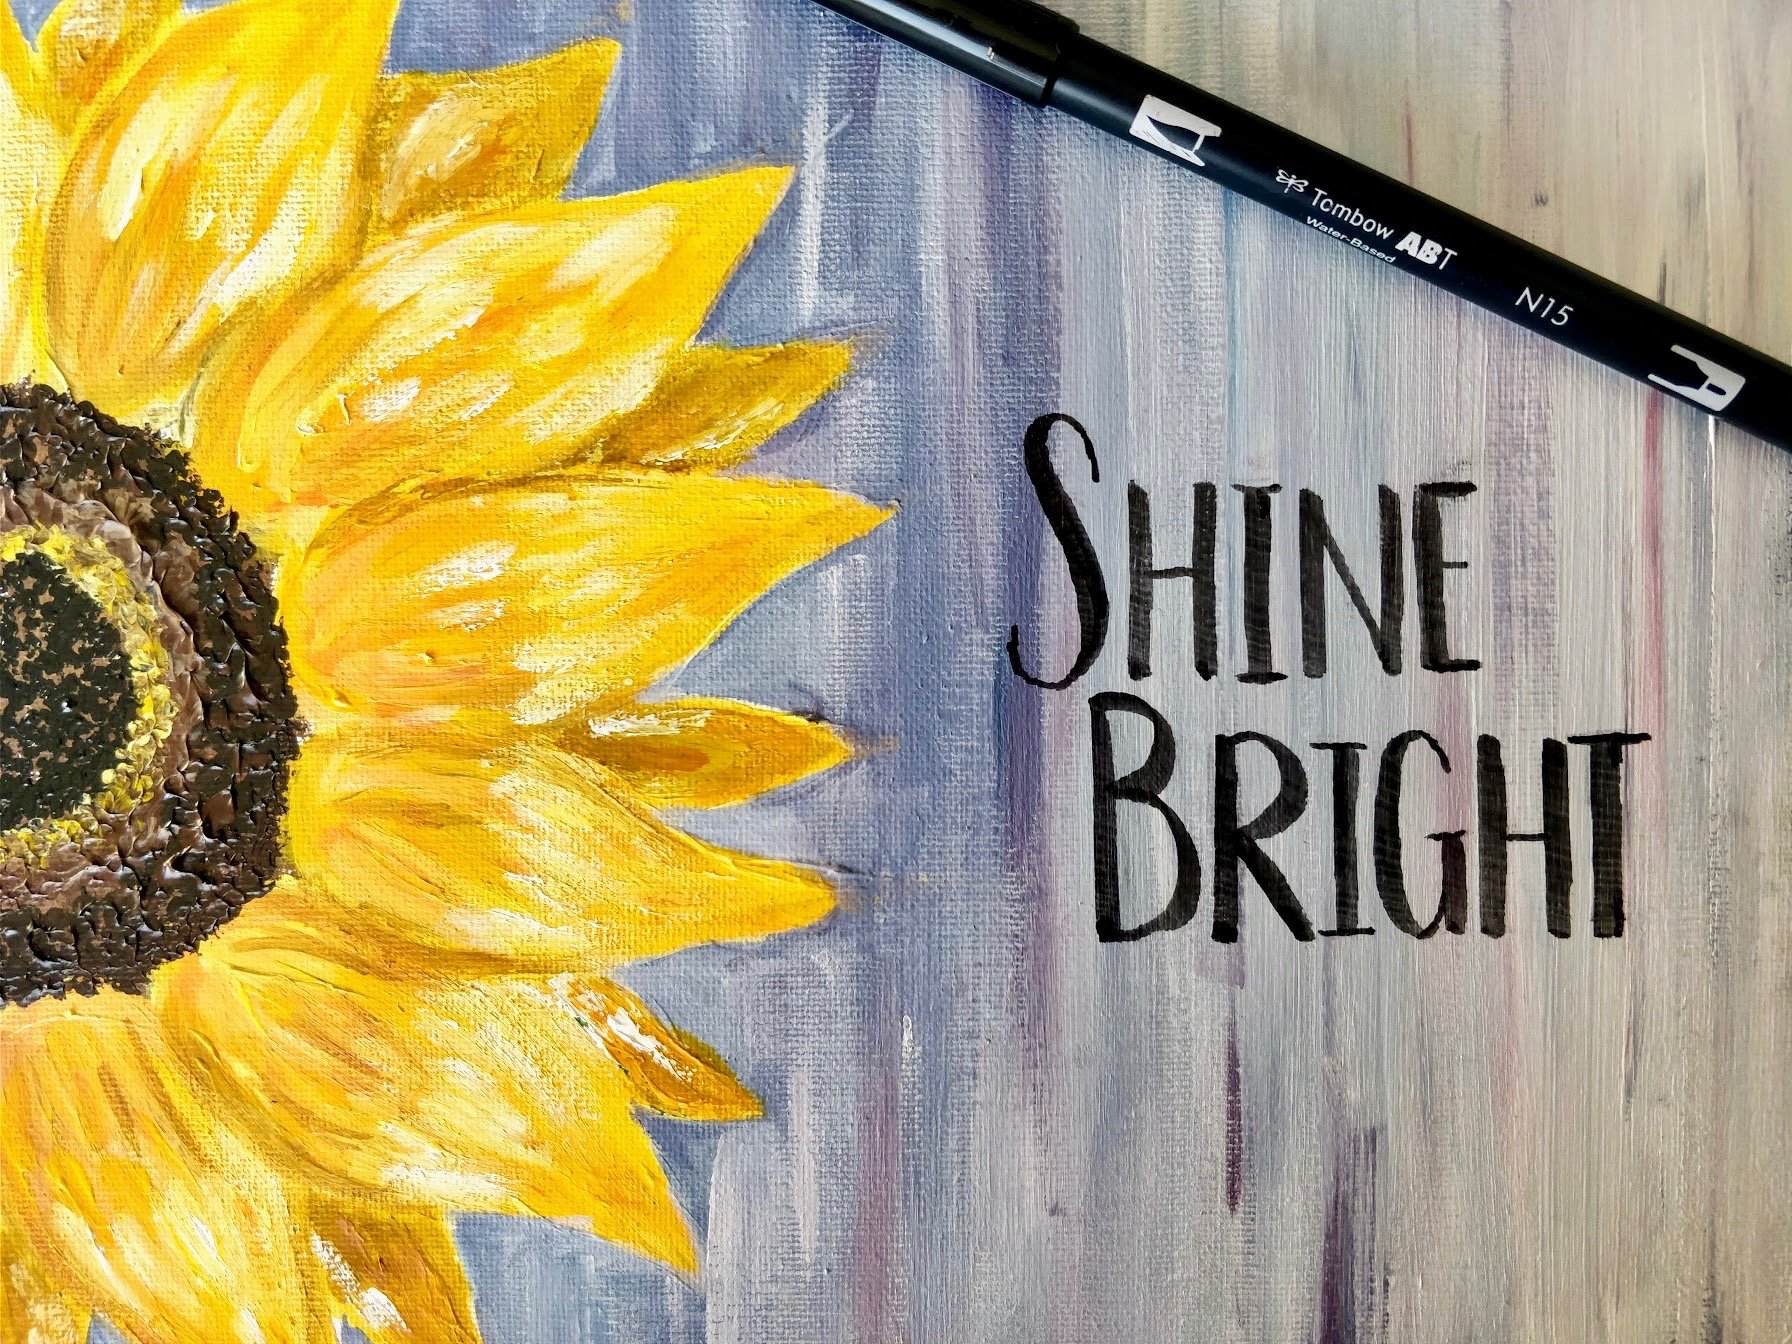 How To Paint A Sunflower Learn To Paint For Beginners Series